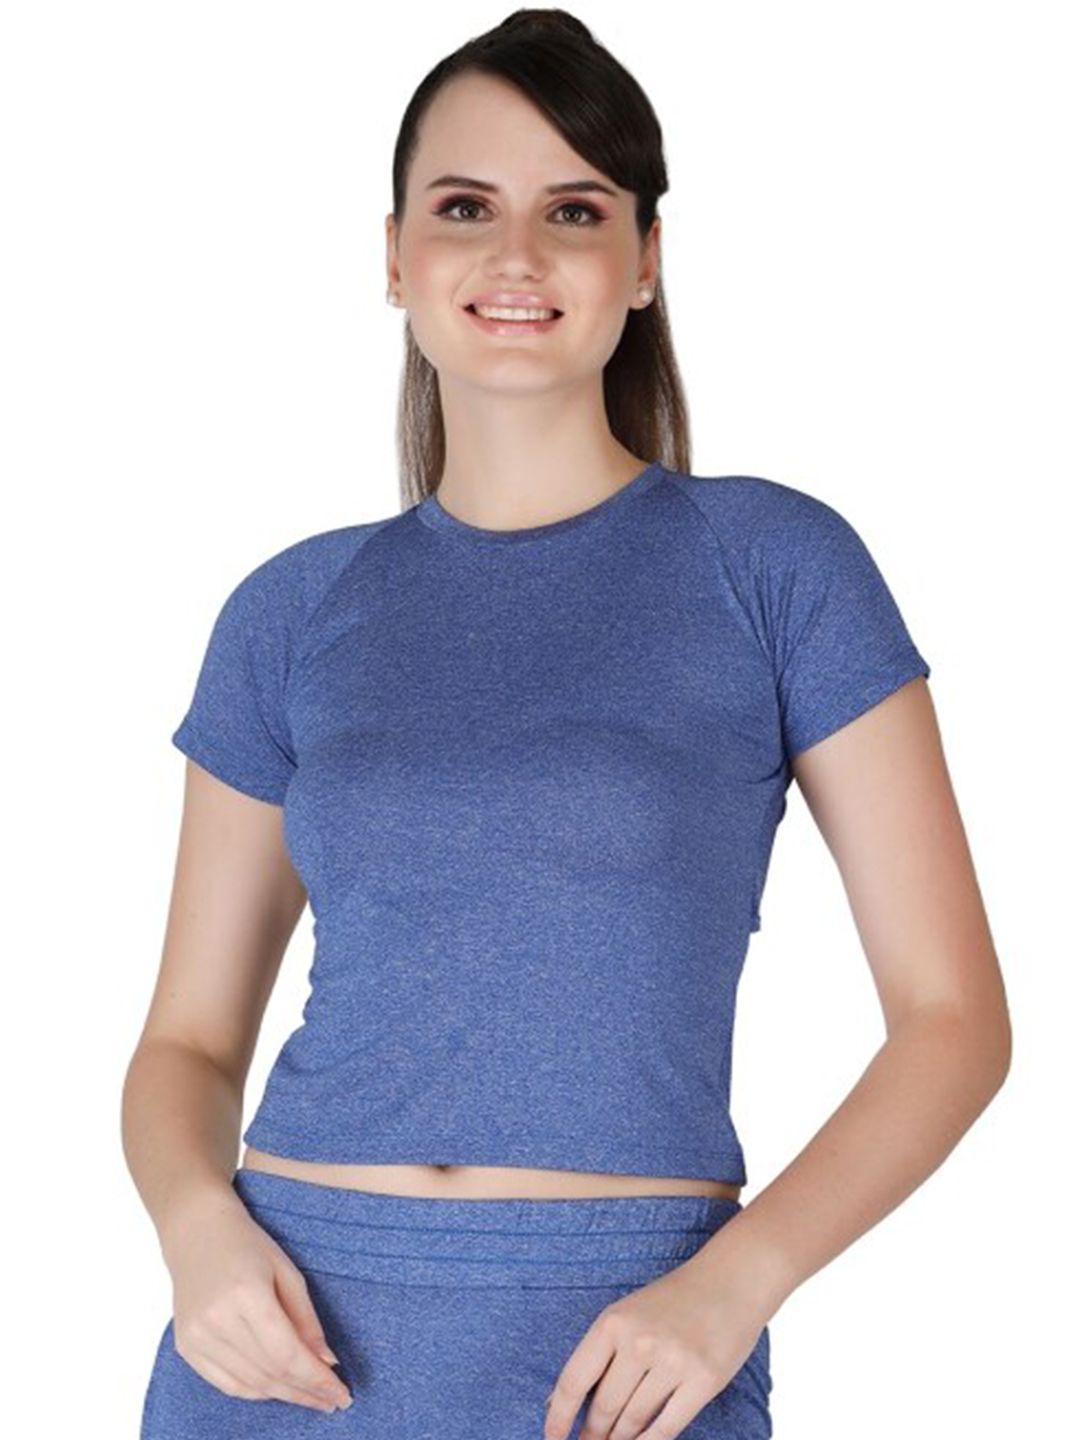 La Aimee Stunning Blue Solid Top Price in India